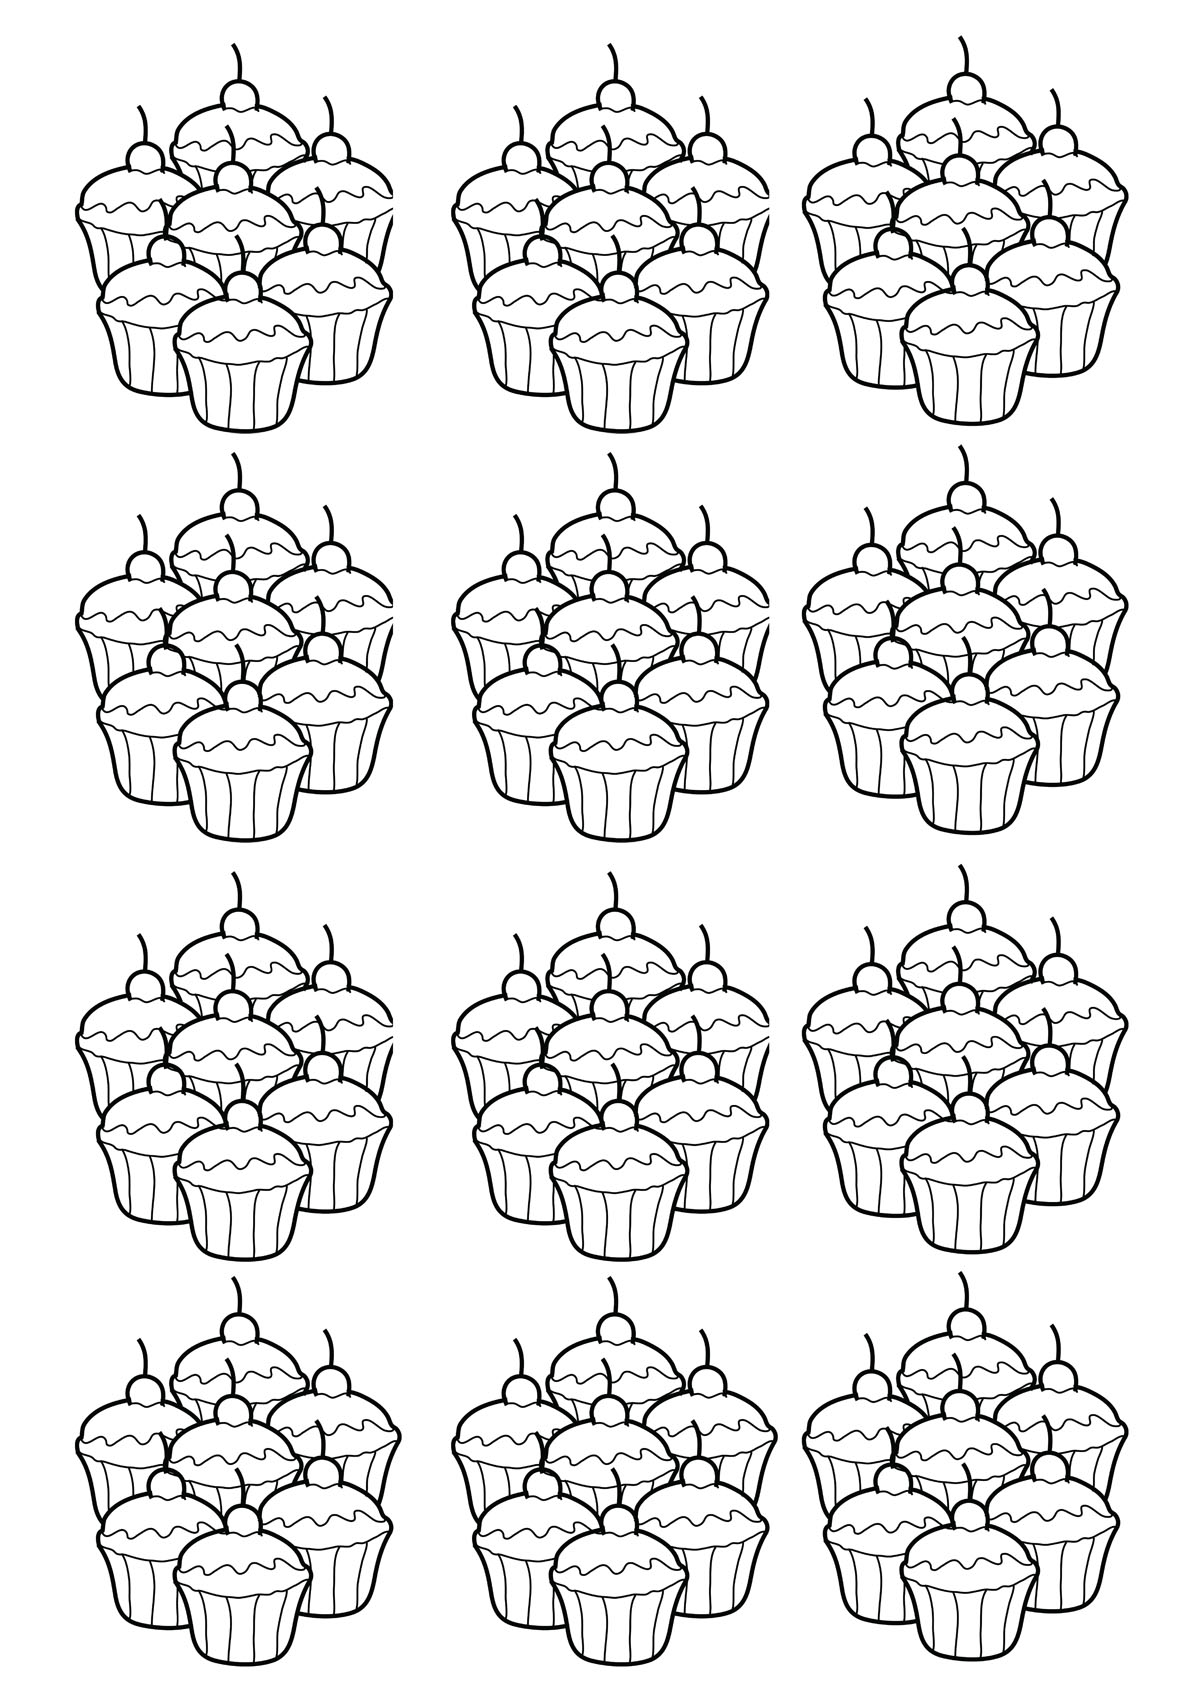 Cup cakes 54732